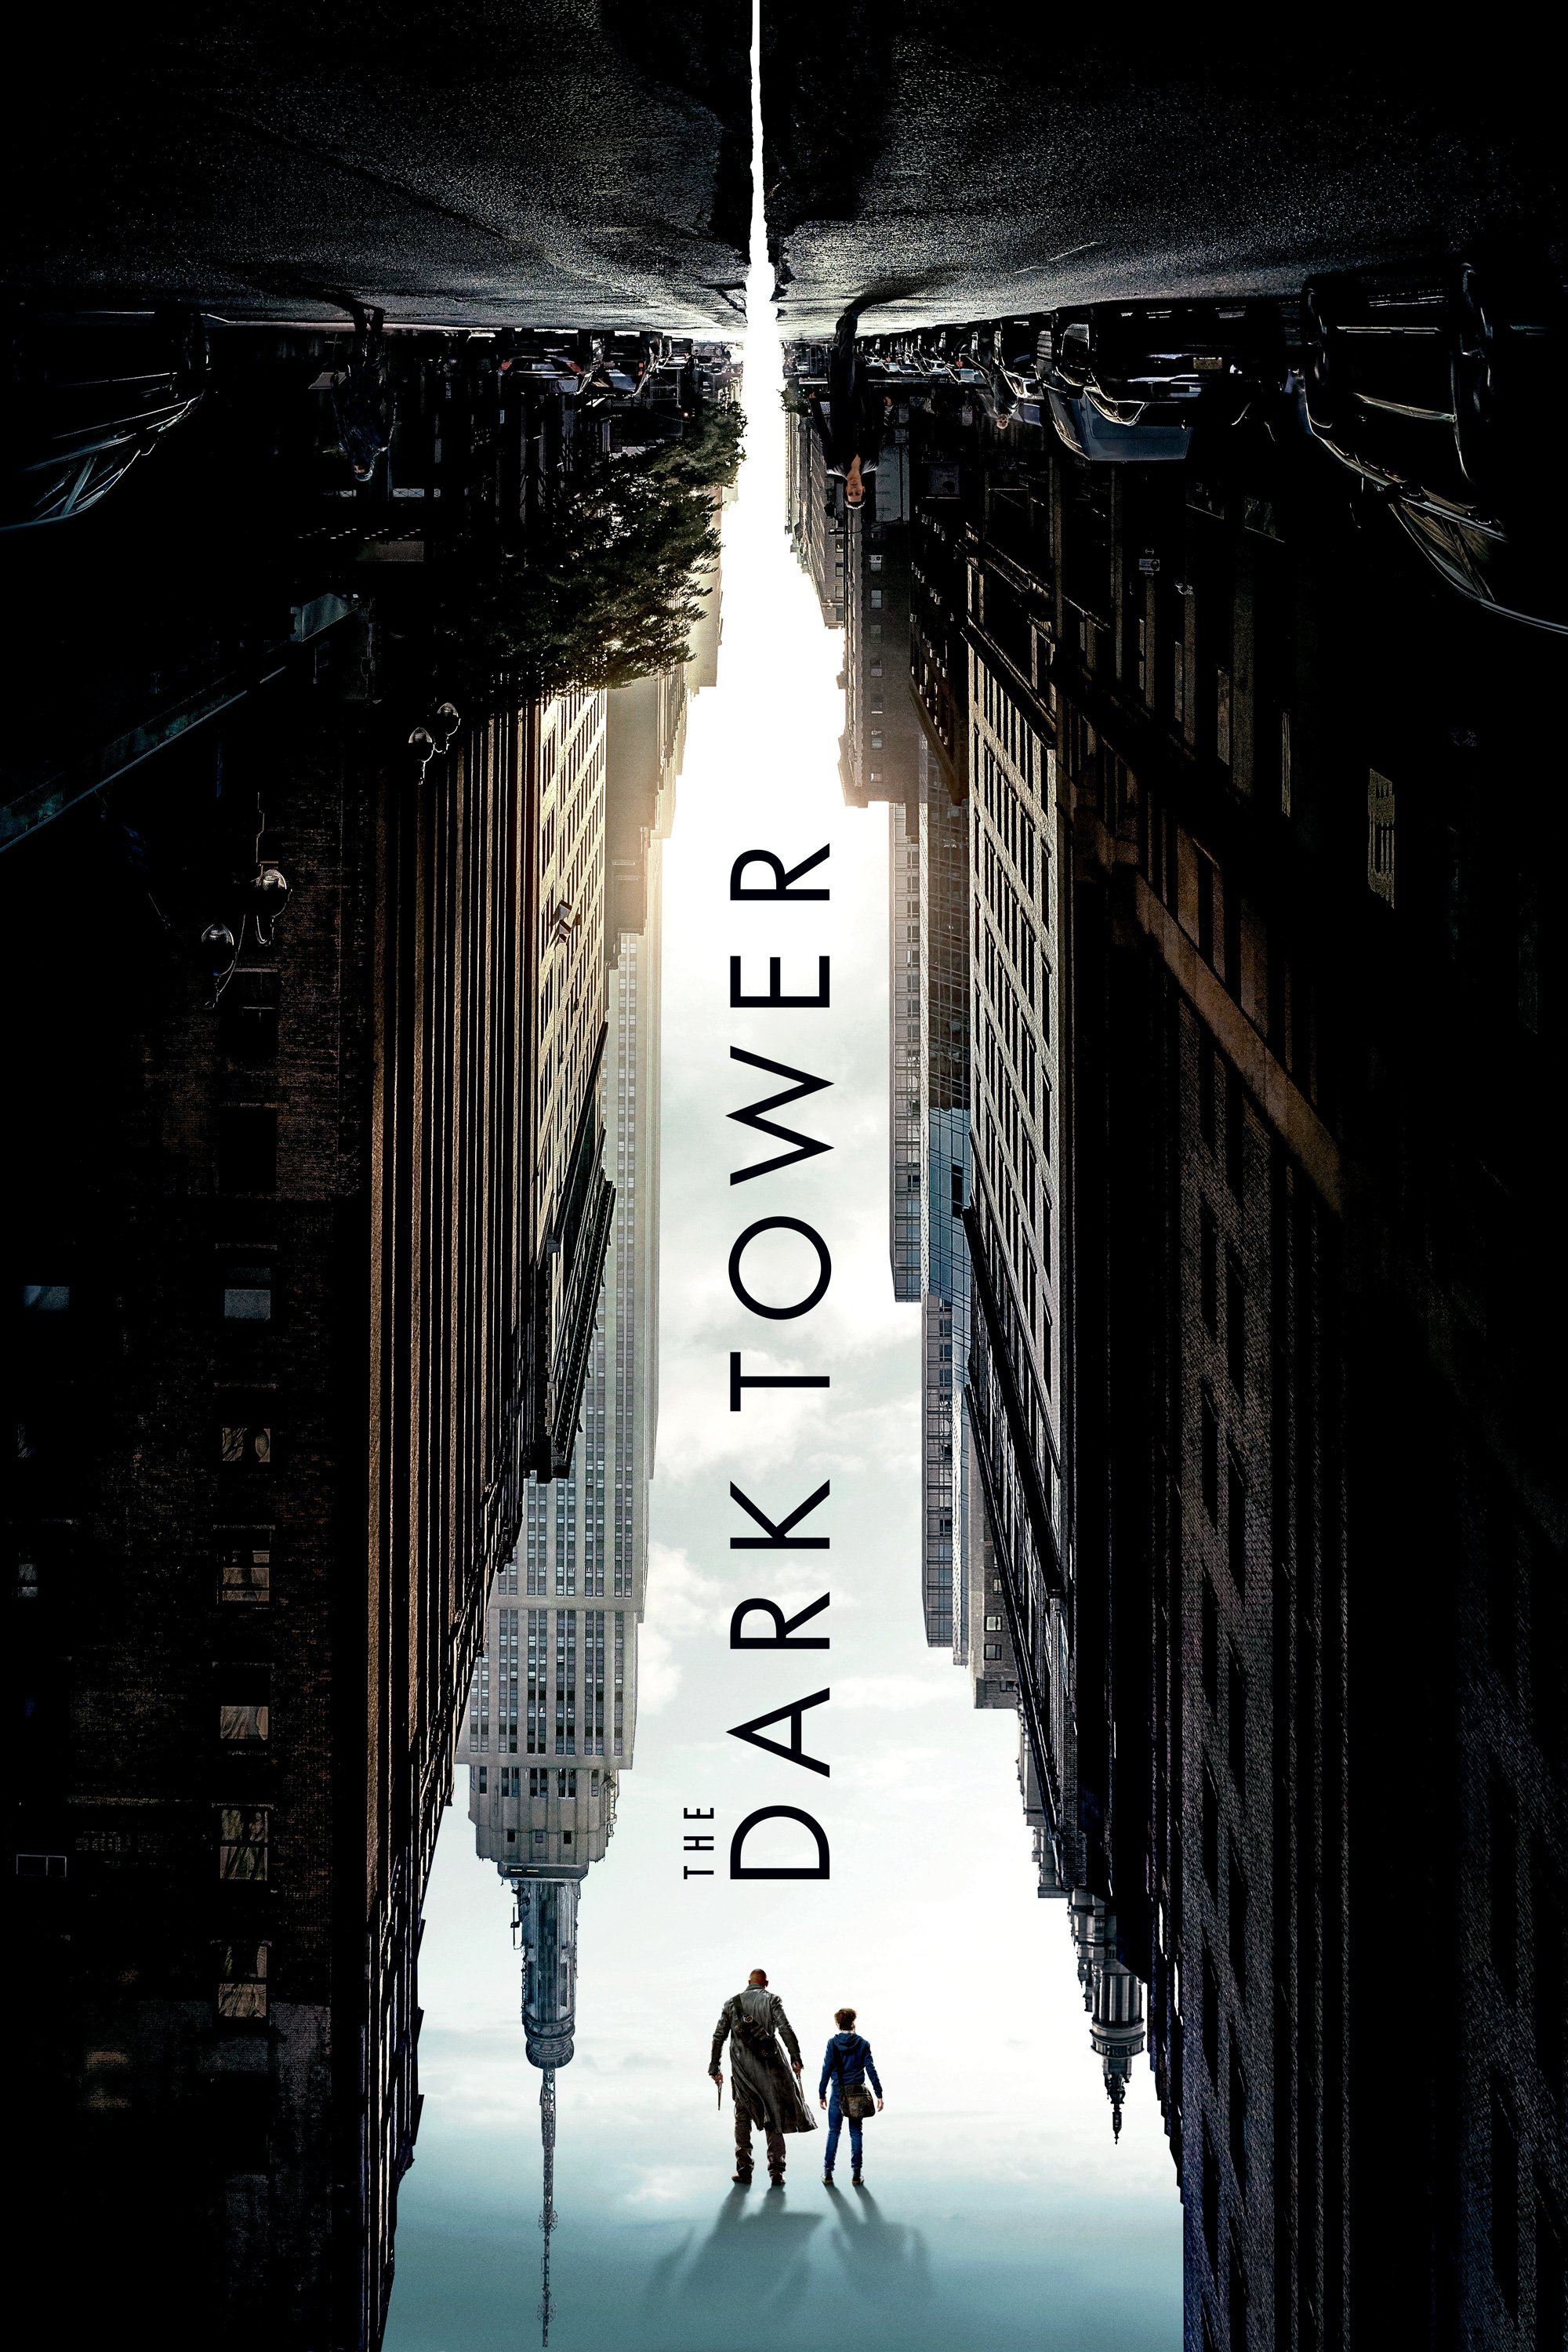 Poster for the movie "The Dark Tower"